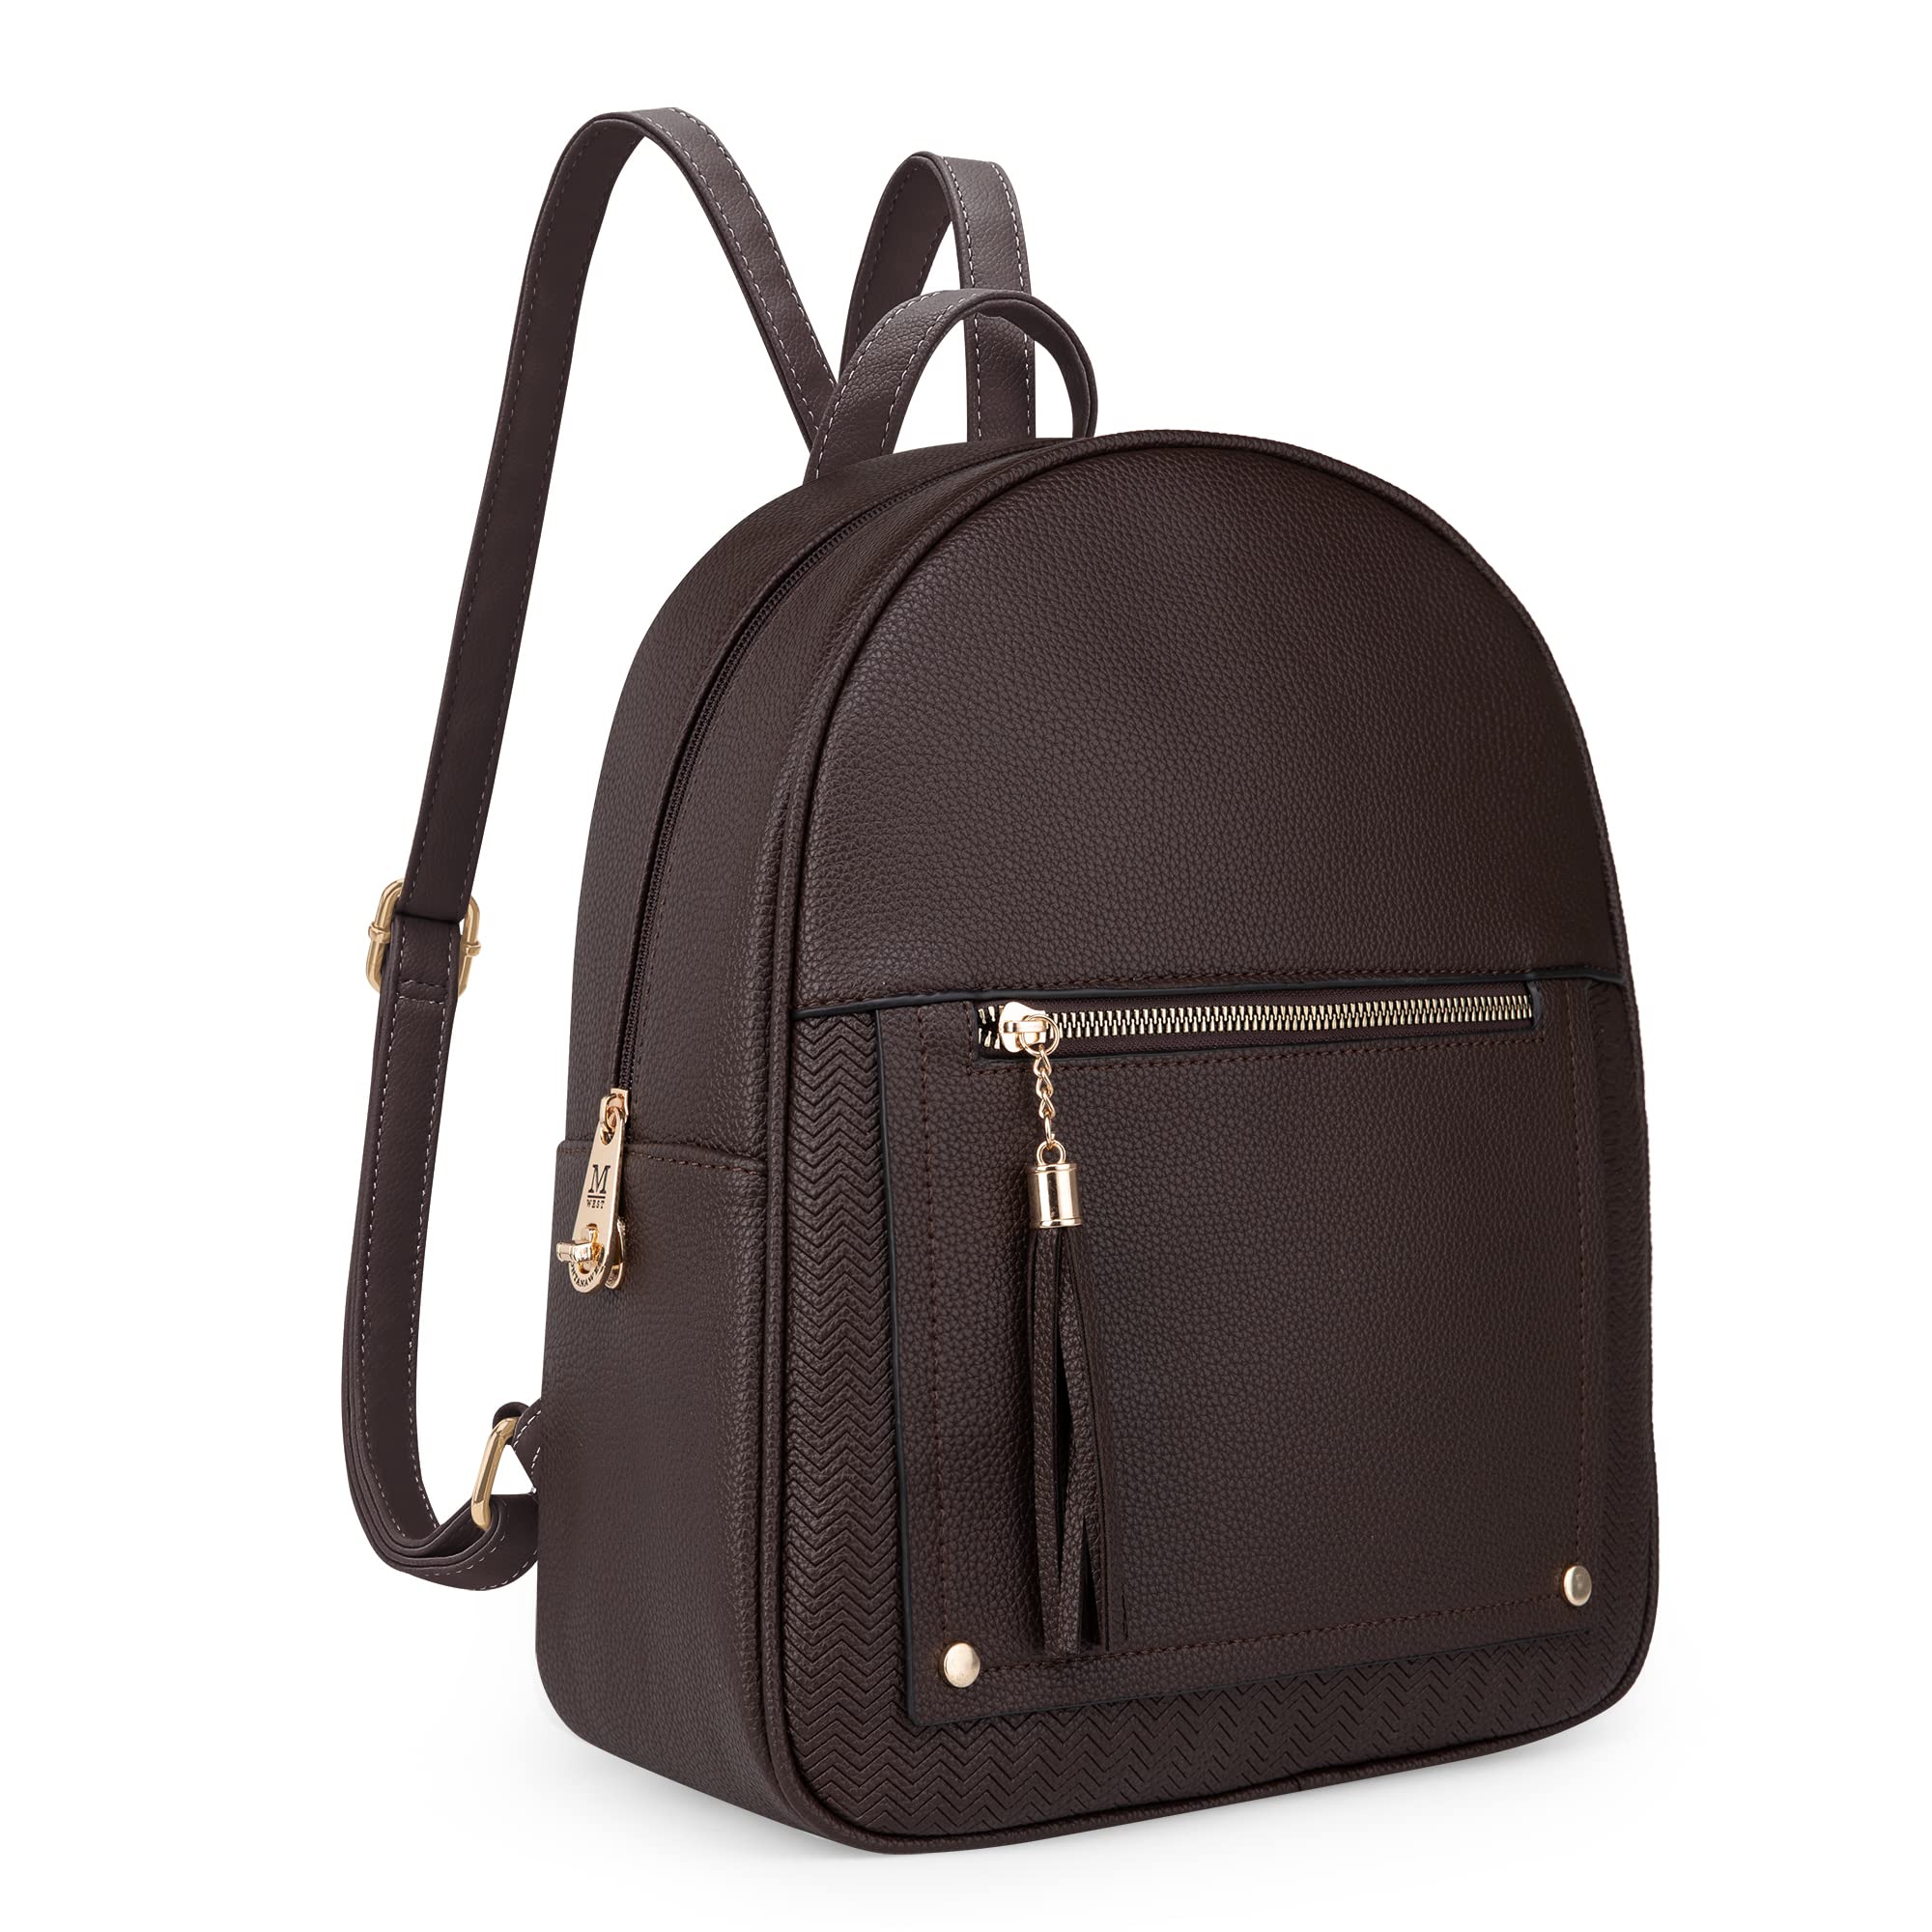 Montana West Women's Anti Theft Backpack Purse w/ Secured Zipper & Tassel (Coffee) $13.50 + Free Shipping w/ Prime or on $25+